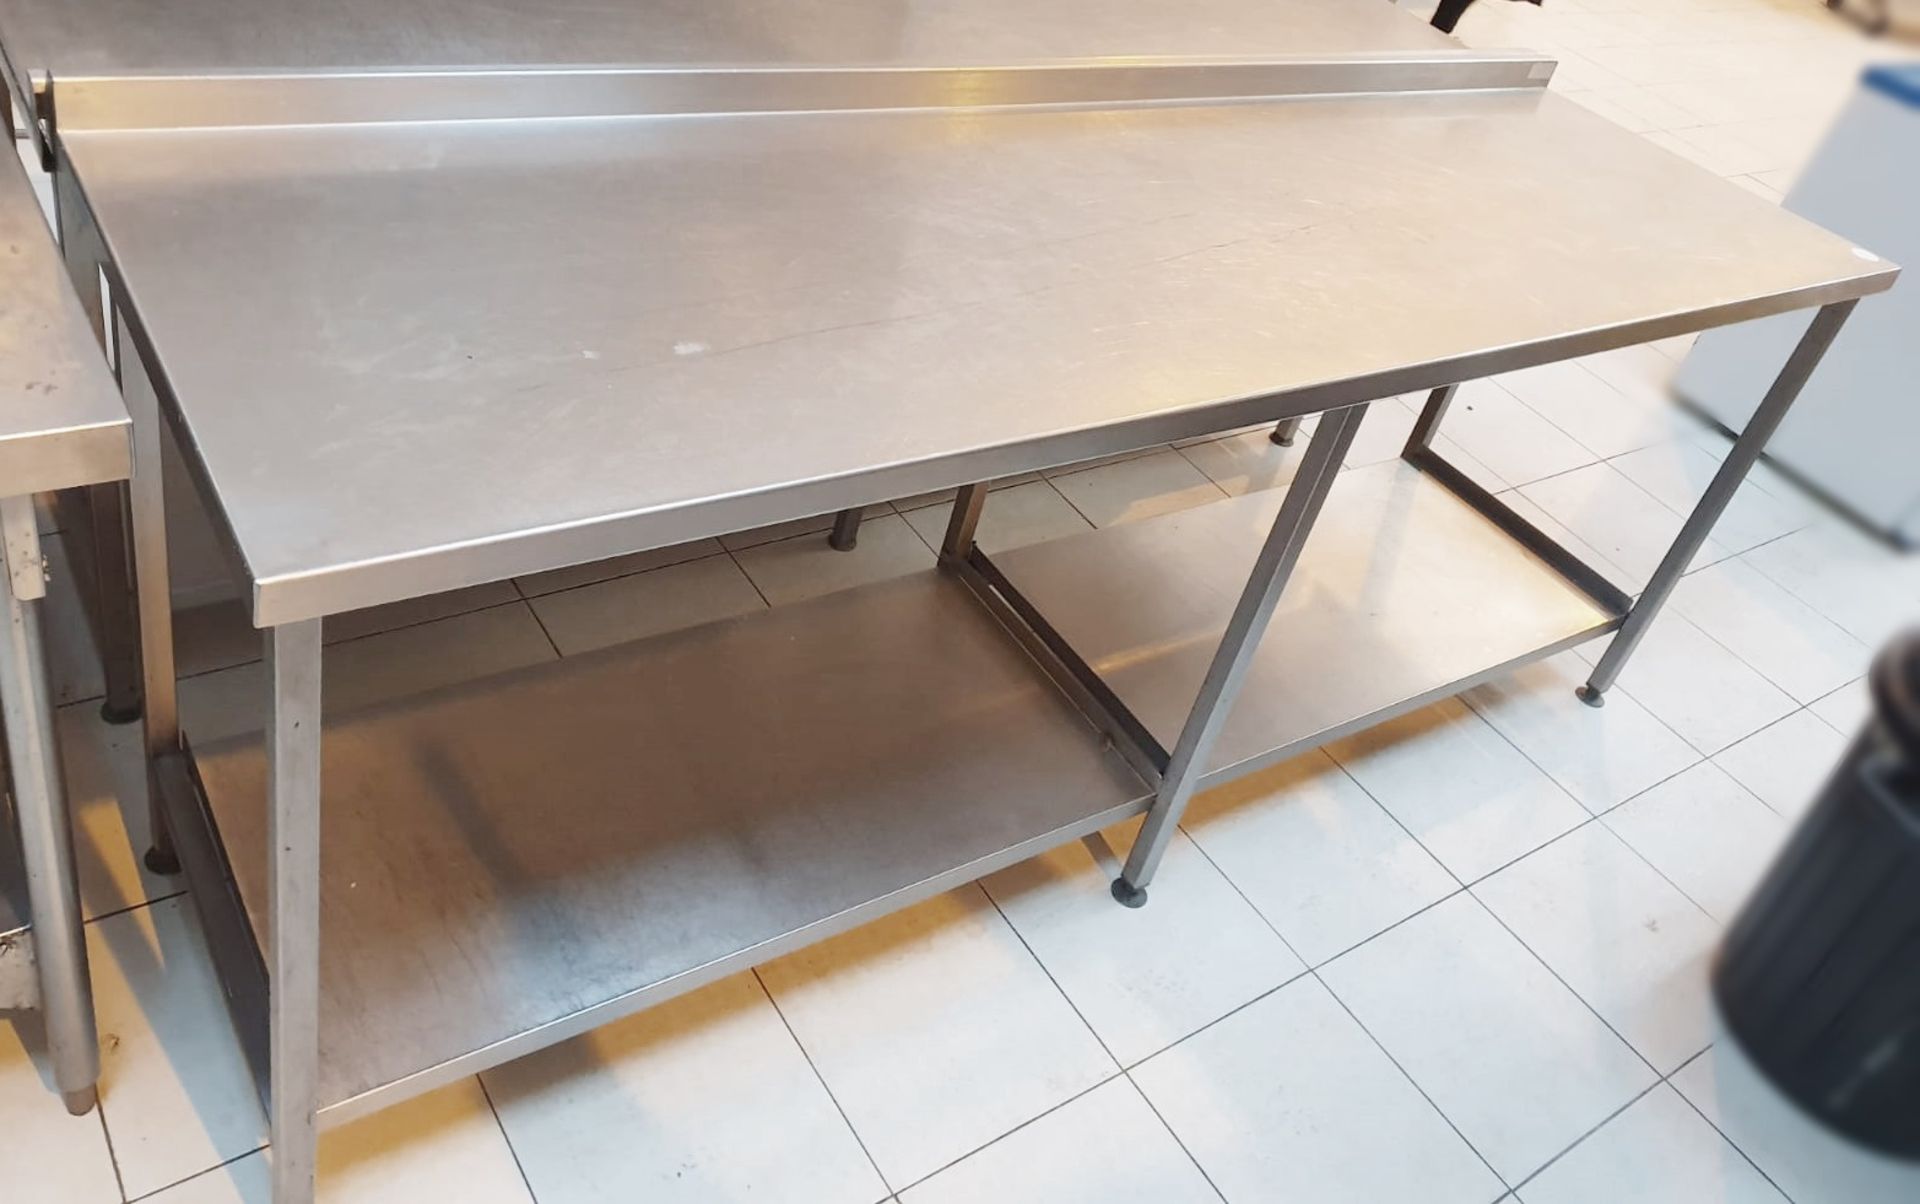 1 x 2.2-Metre Long Stainless Steel Prep Table With Upstand And Bottom Shelf *£5 Start - No Reserve*